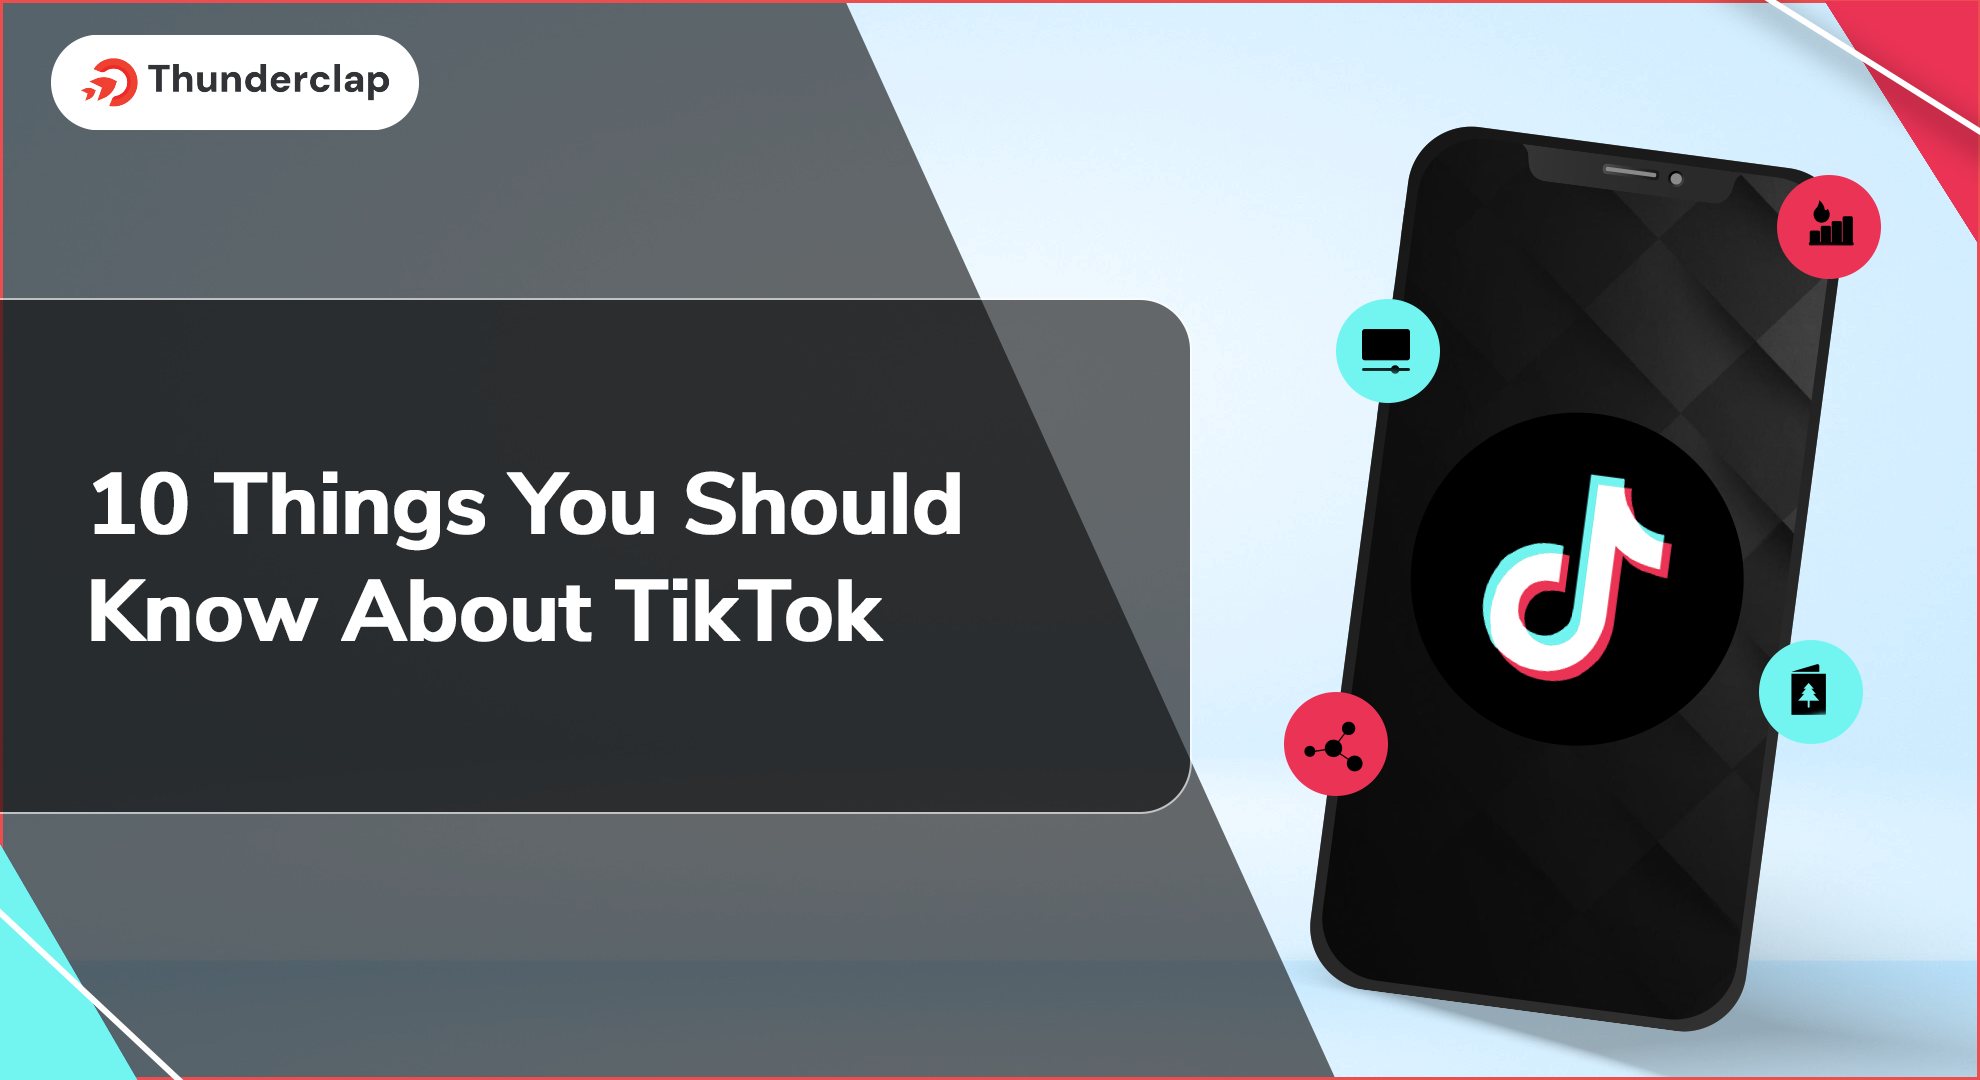 Things You Should Know About TikTok